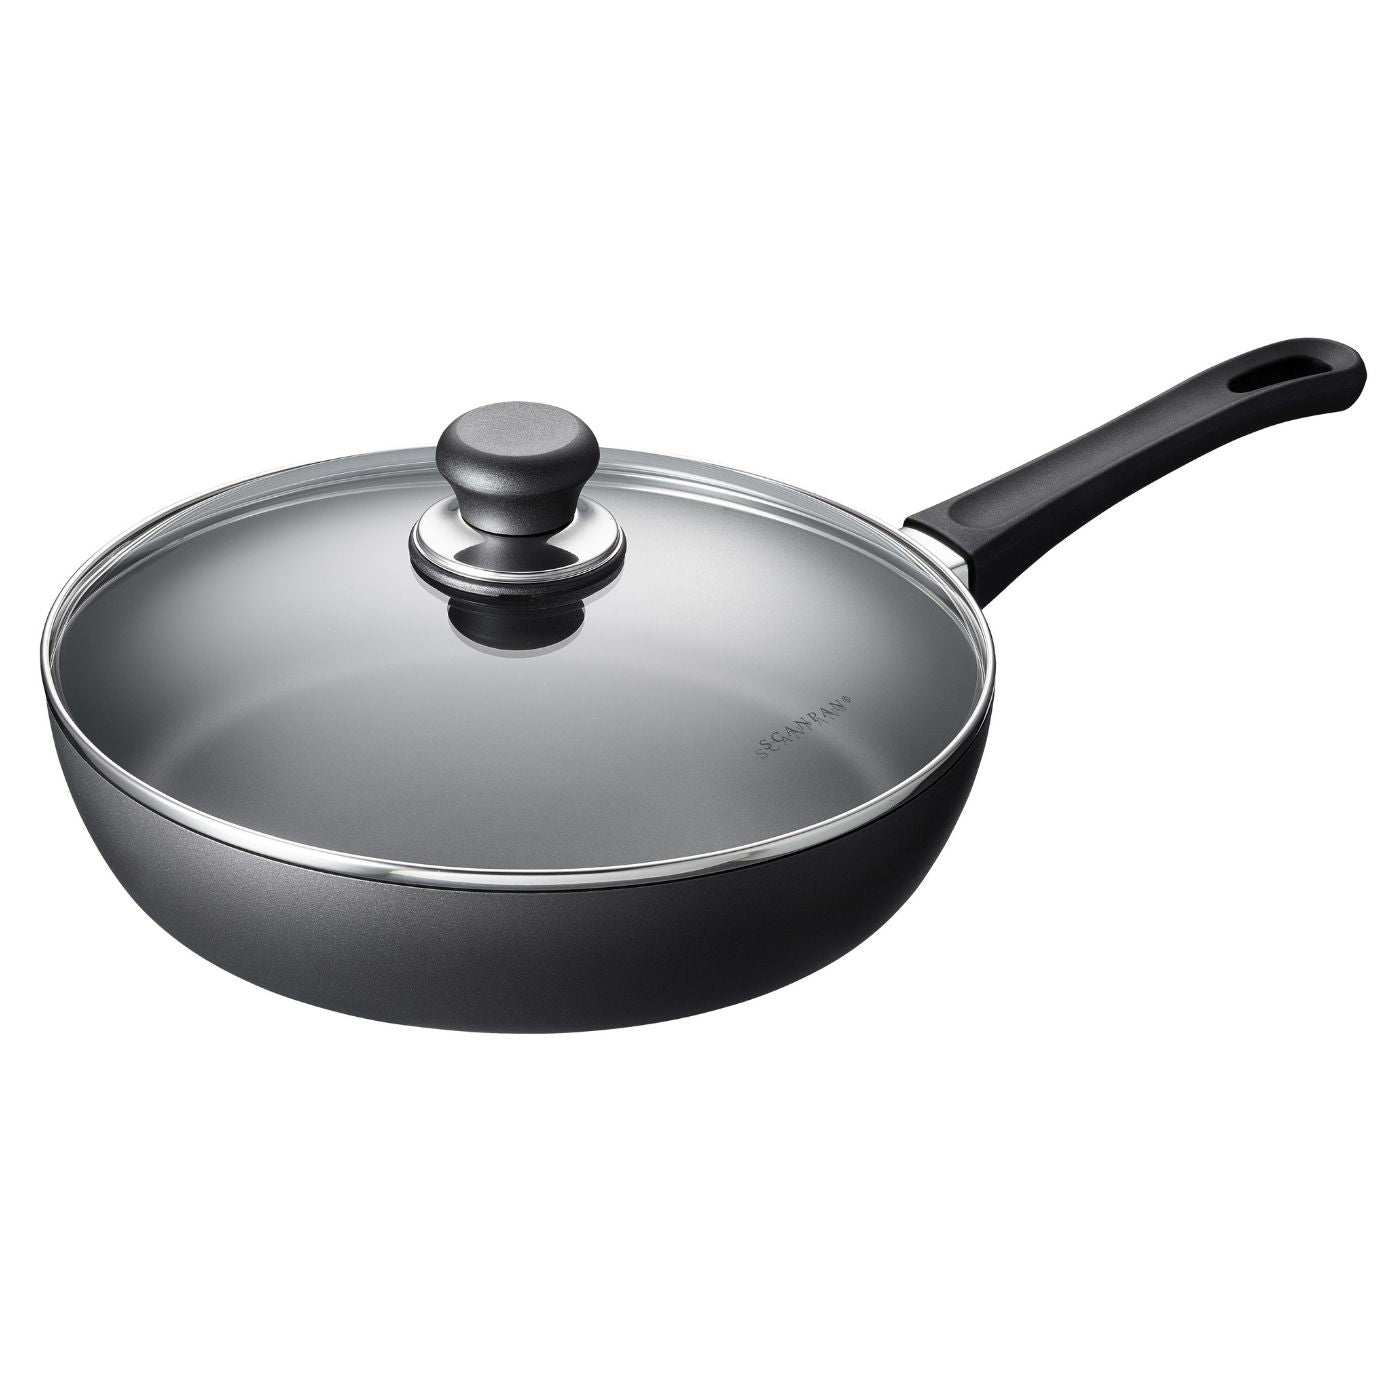 Scanpan Non Stick Classic Induction Saute Pan with Glass Lid - 24cm